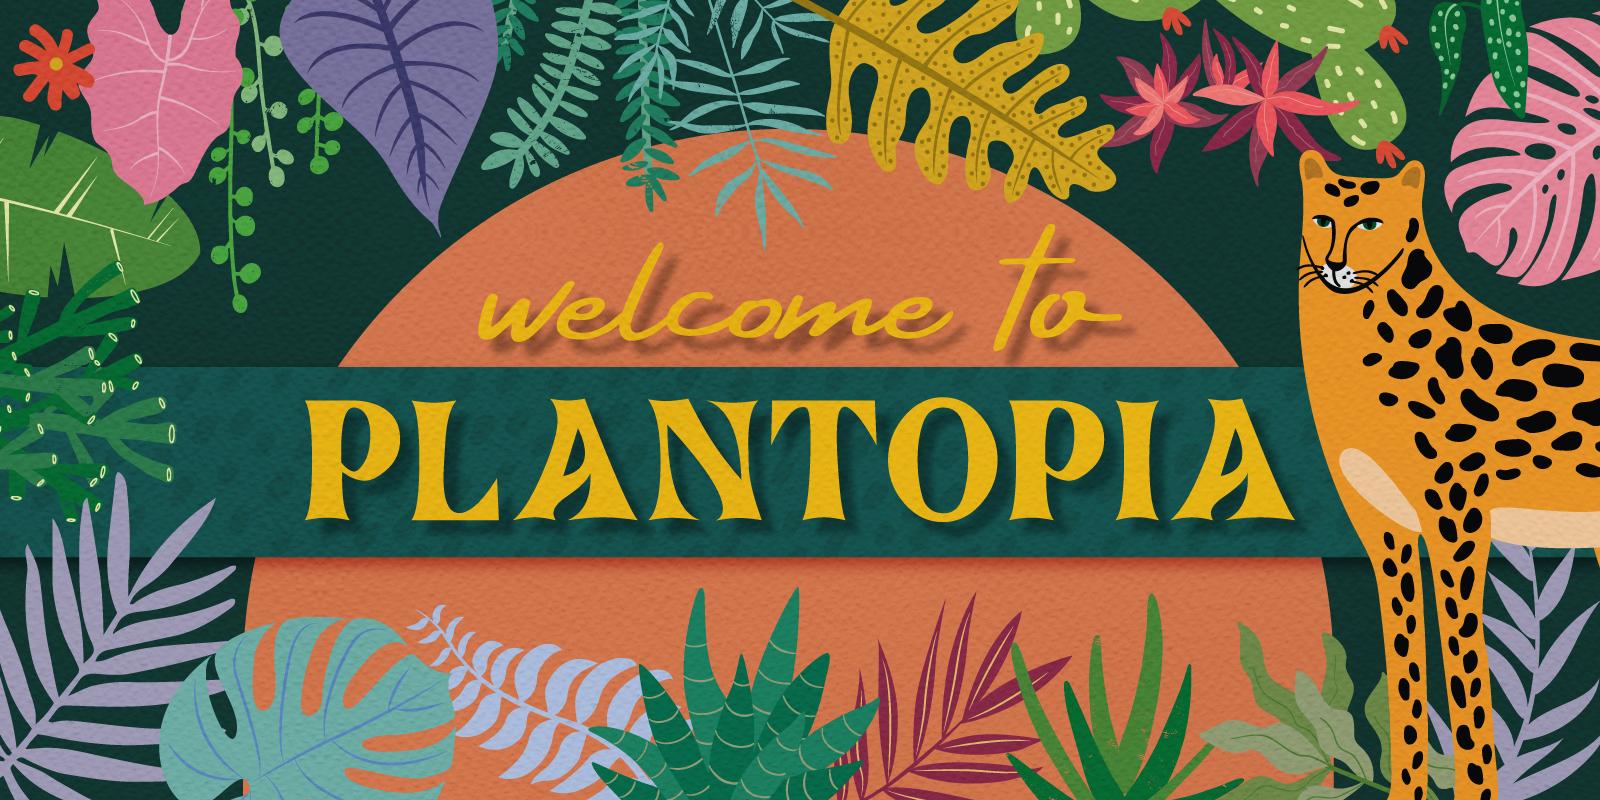 Welcome to Plantopia